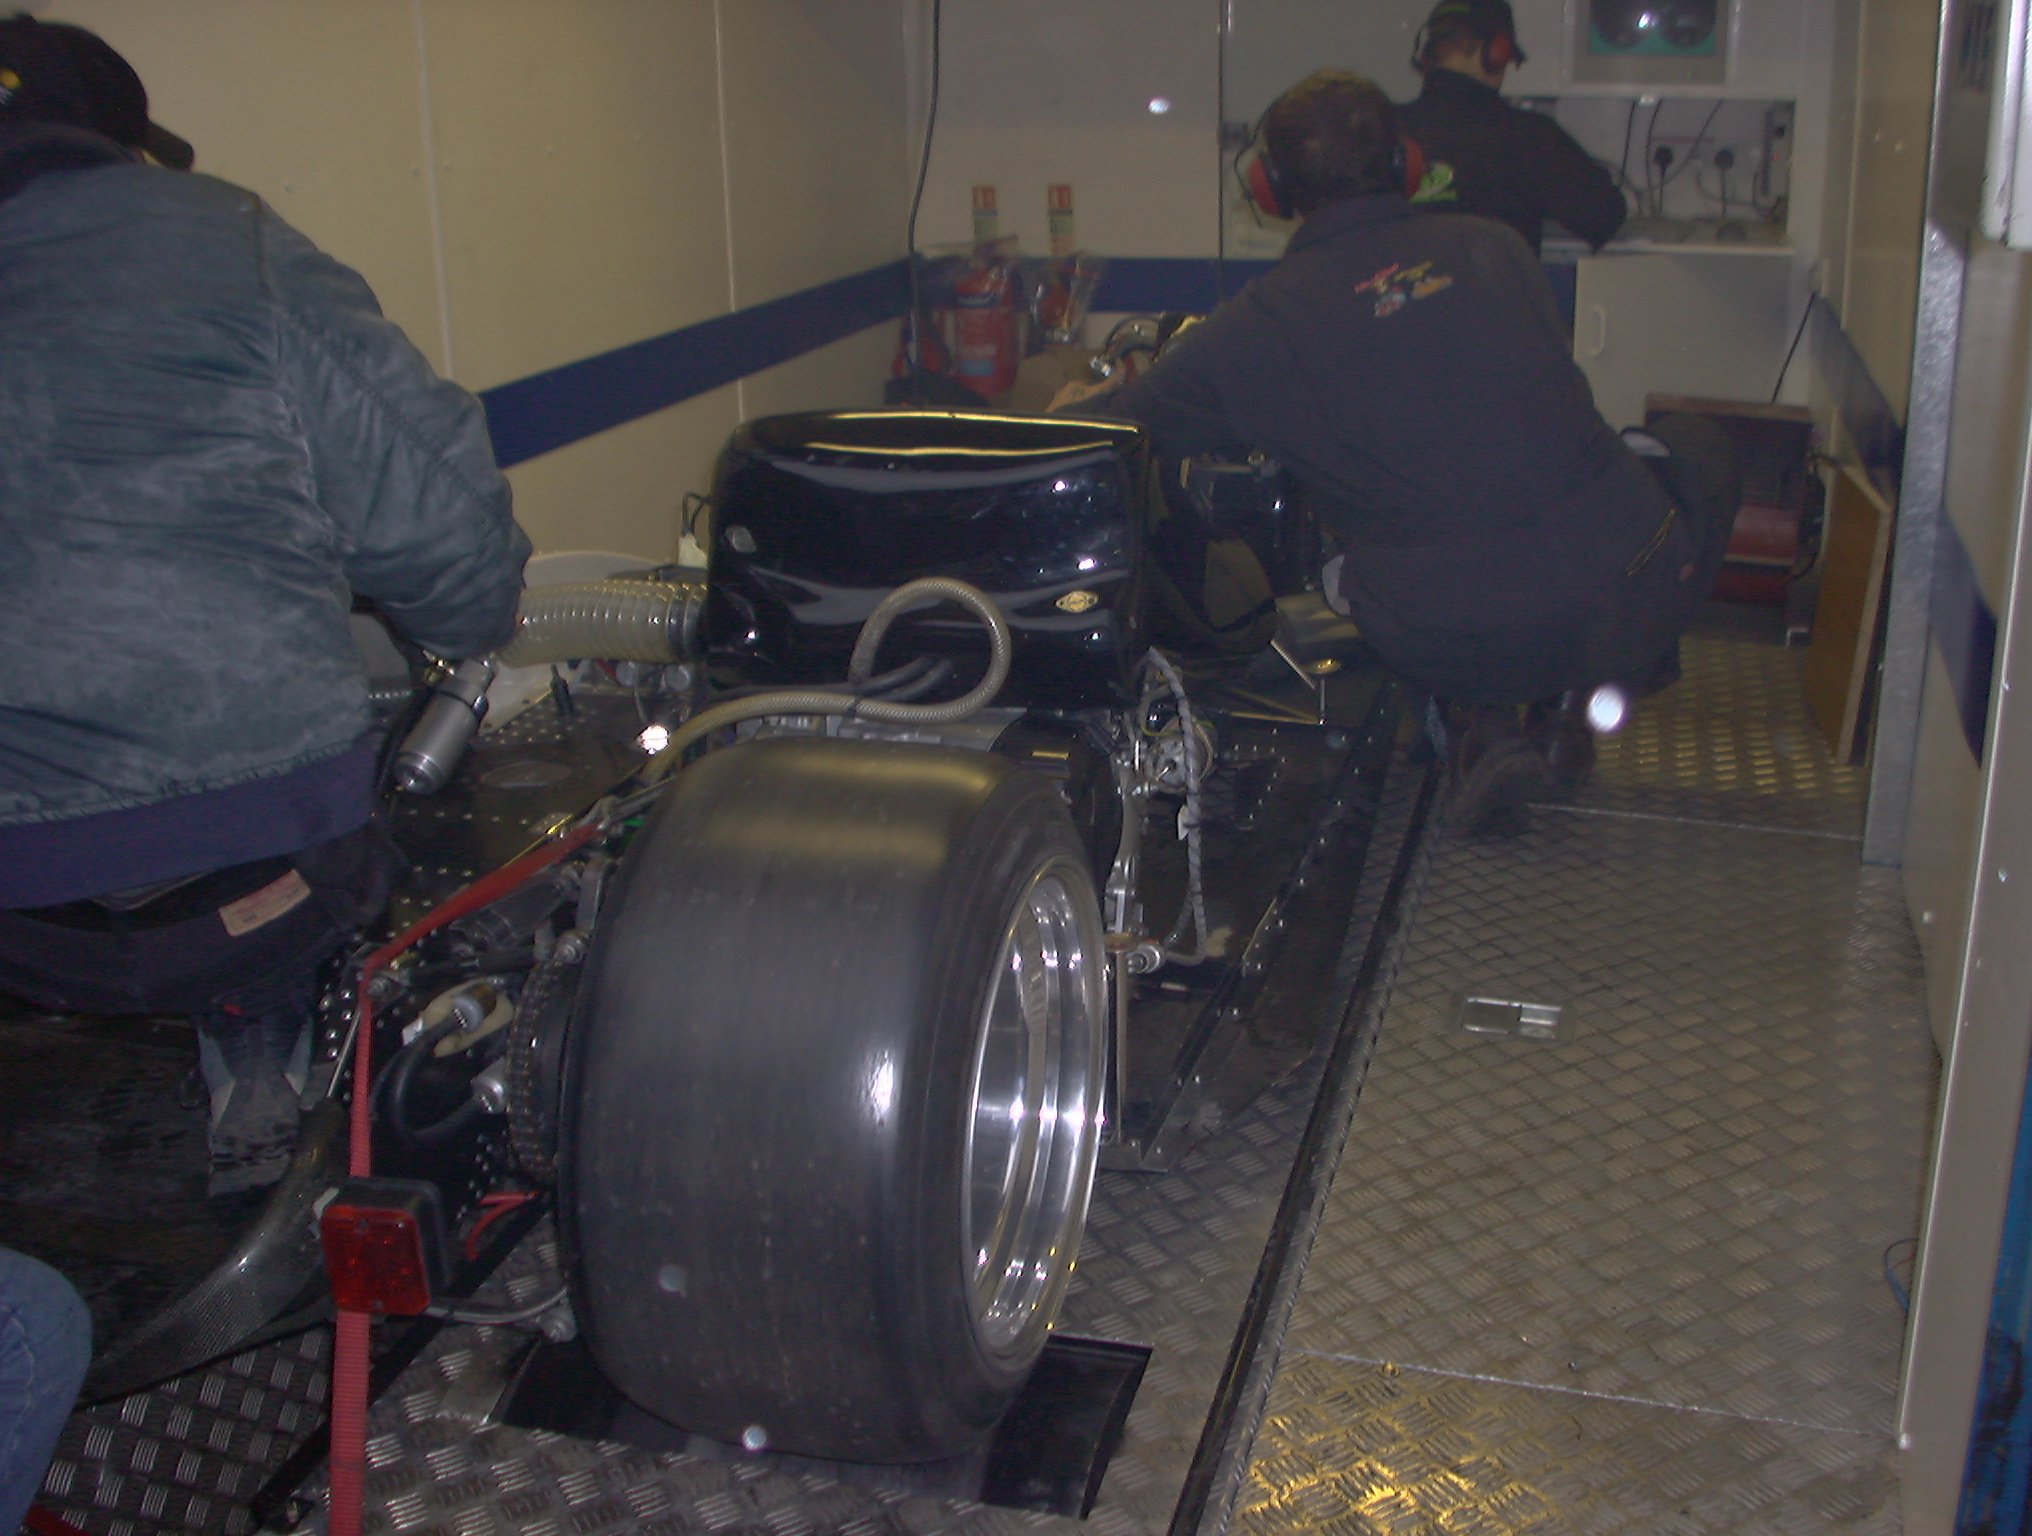 M & M F2 SIDECAR OUTFIT FLAT OUT ON DYNO GOD THE SOUND!